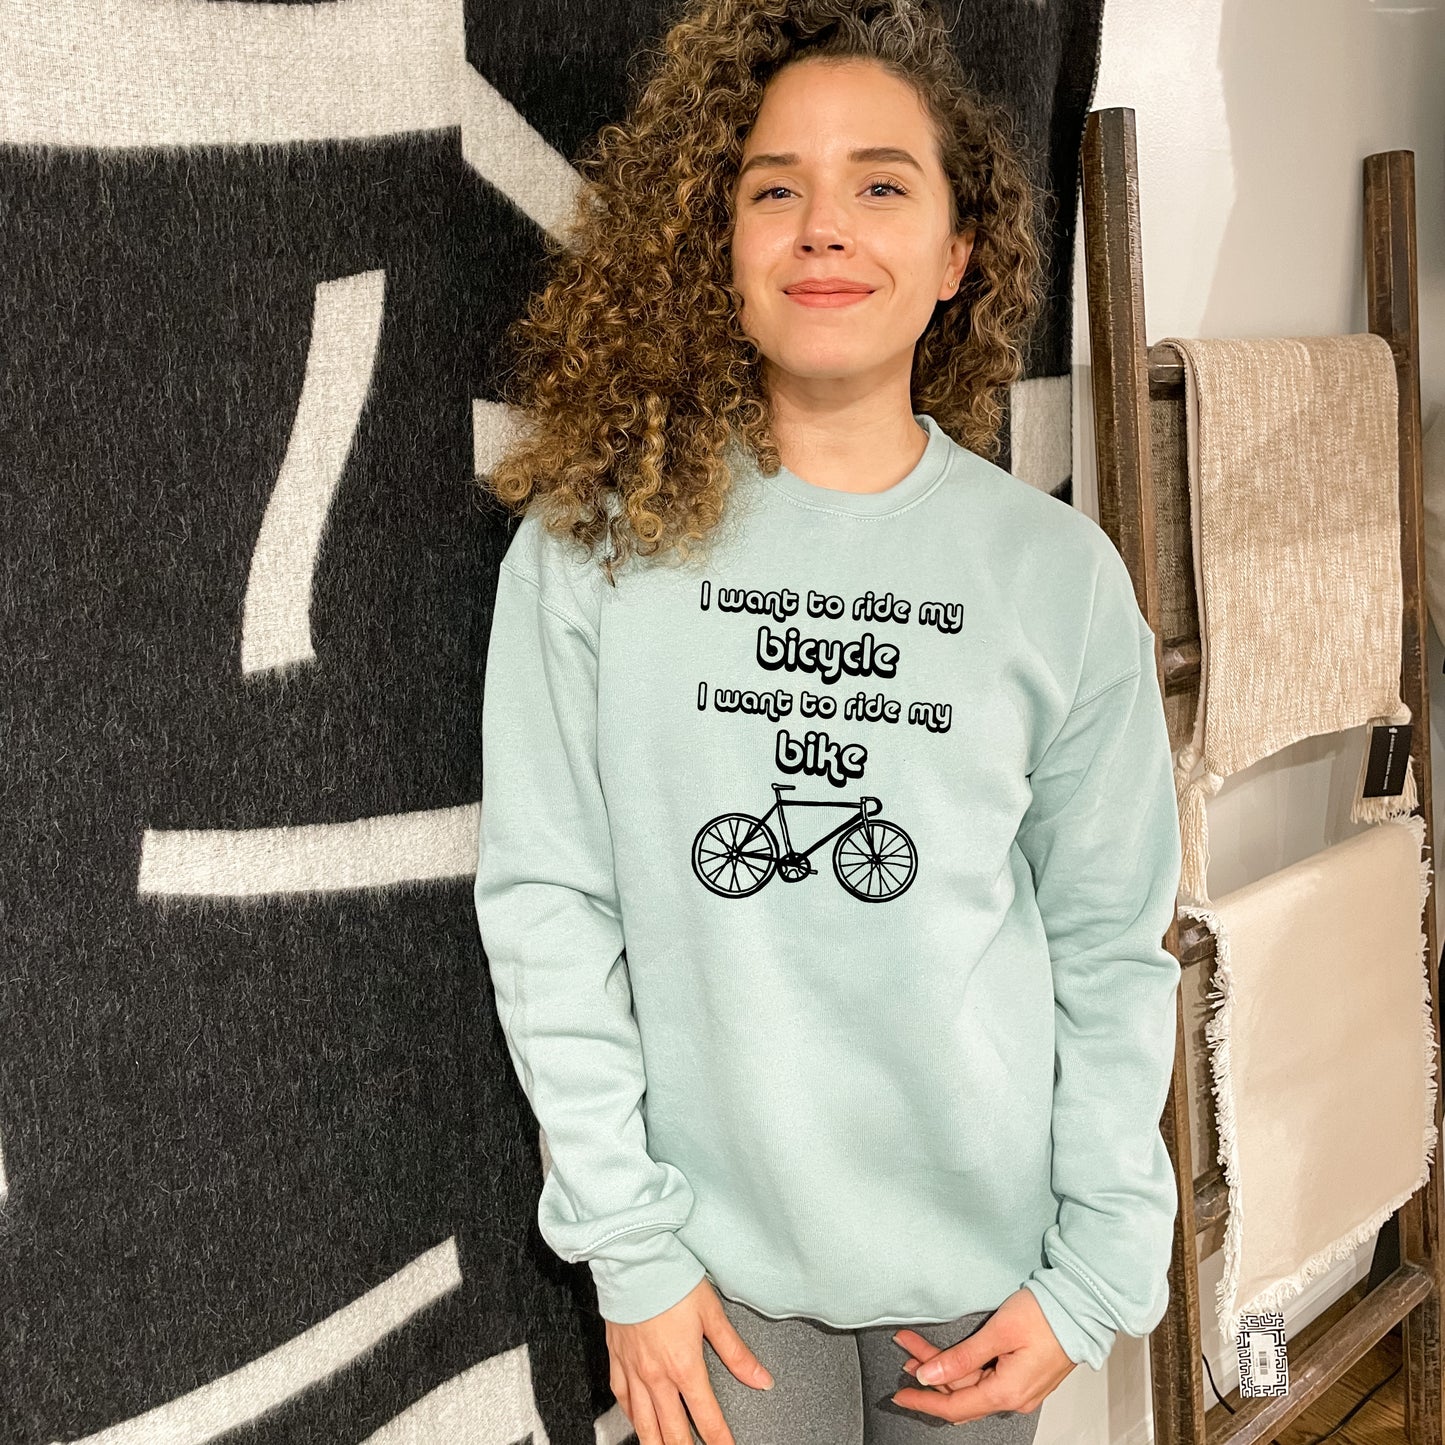 I Want To Ride My Bicycle, I Want To Ride My Bike - Unisex Sweatshirt - Heather Gray or Dusty Blue